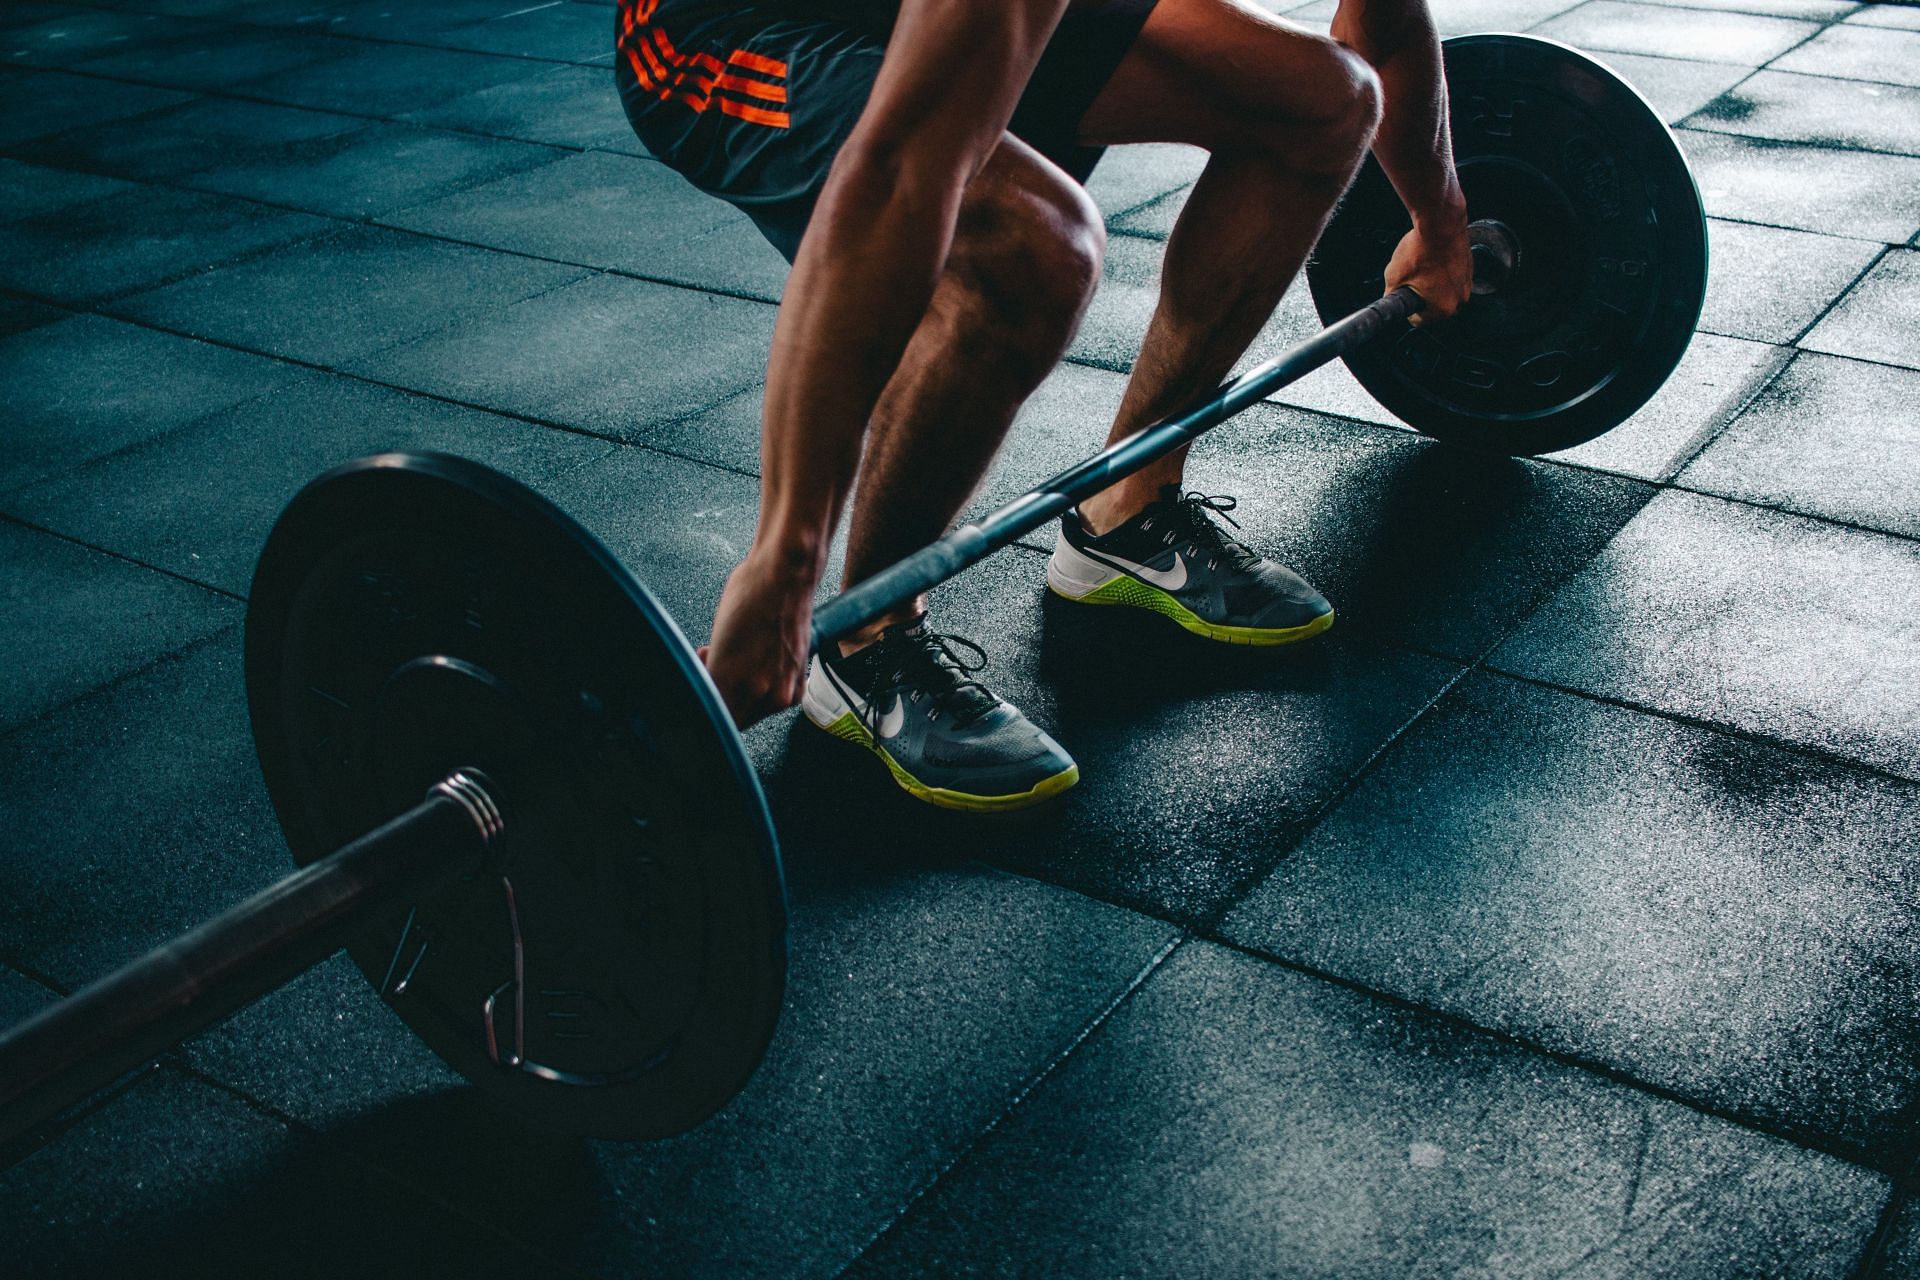 The deadlift, although a classic back exercise, could actually be harming you in the long run. (Image via unsplash/Victor Freitas)